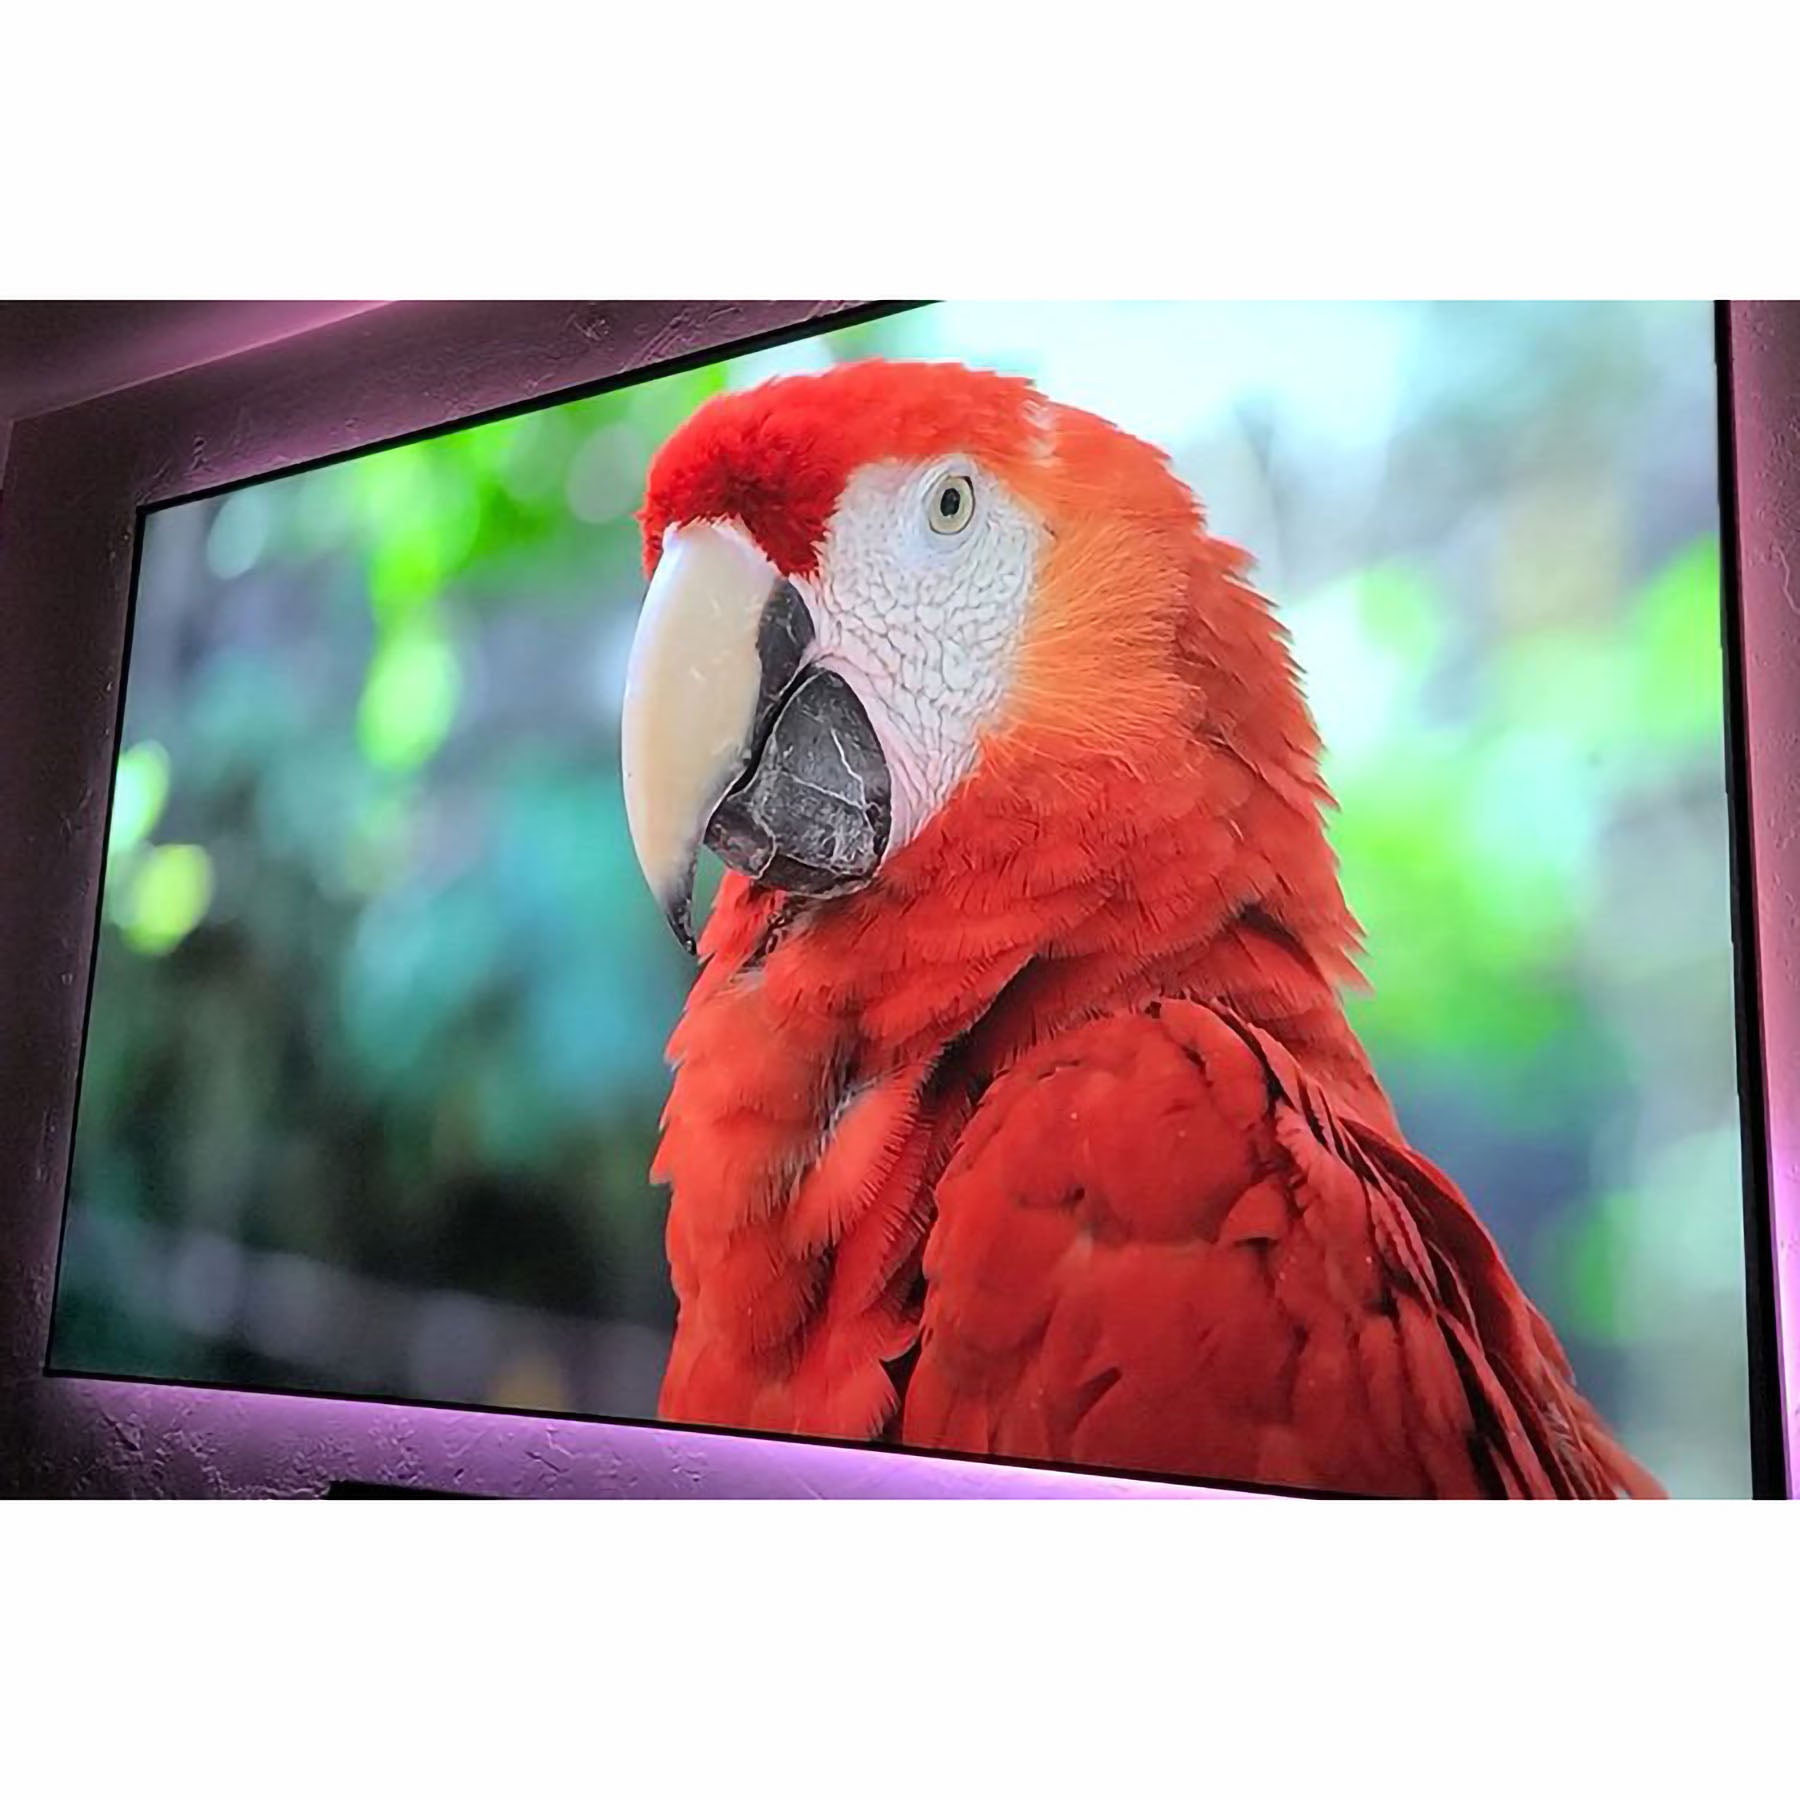 Elite Screen AR100H3-CLR3-U 100" Aeon CLR 3 16:9 Fixed Frame with LED Kit included